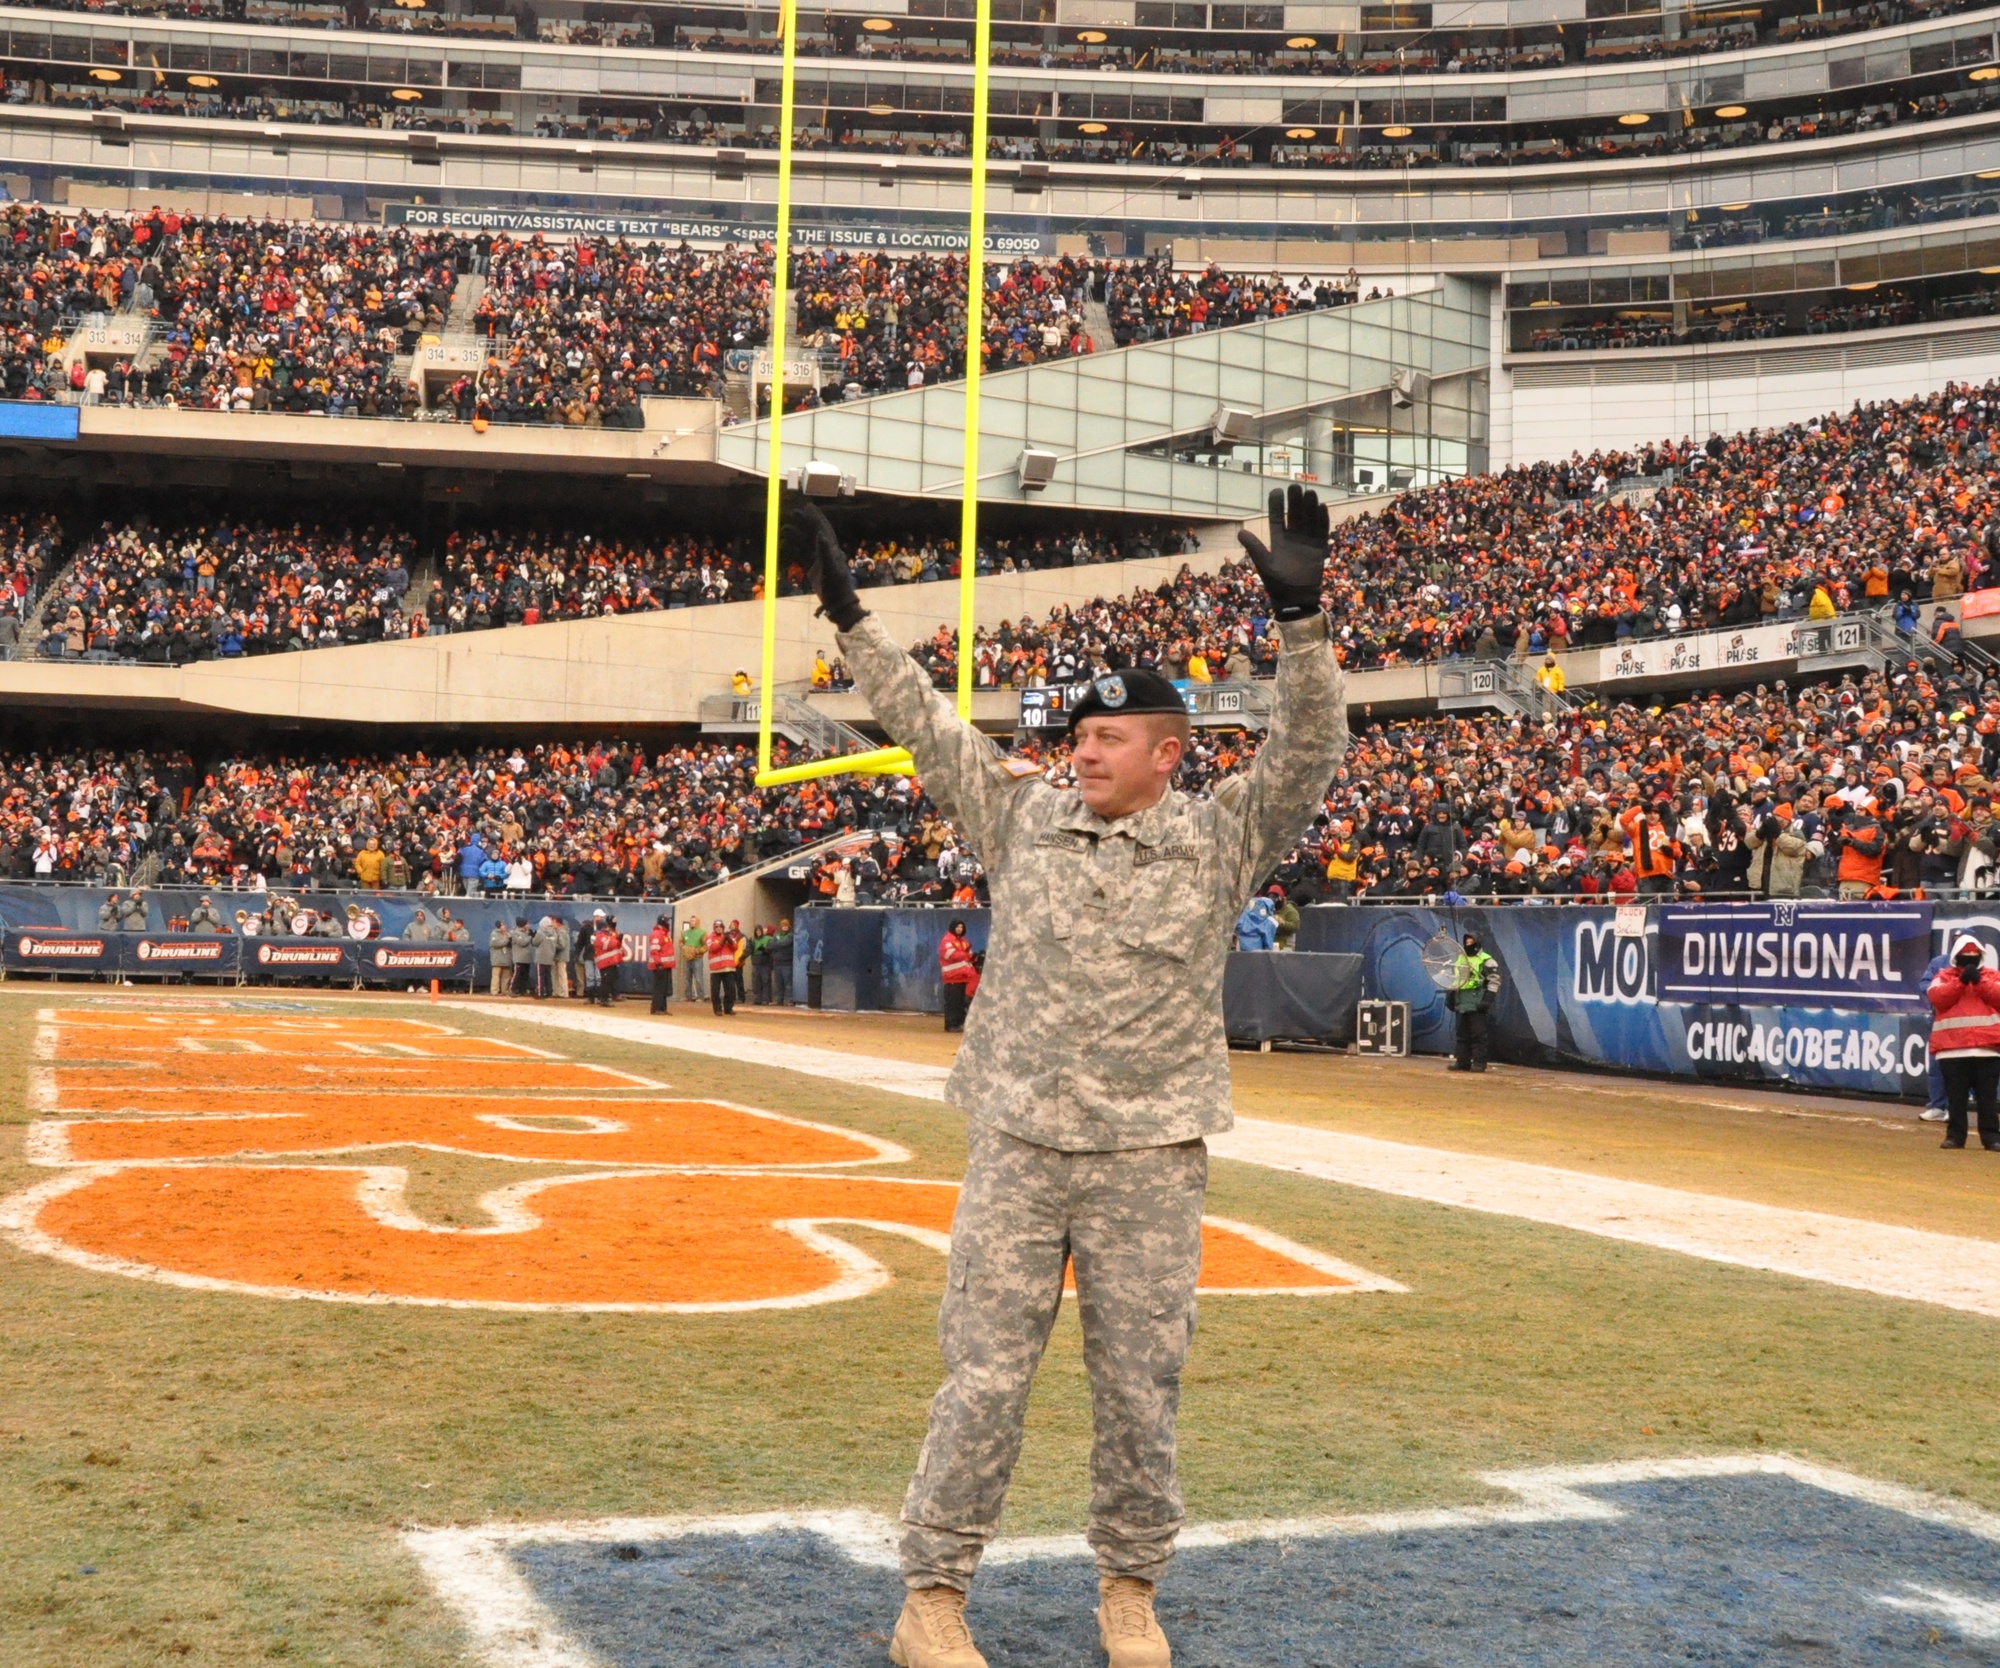 DVIDS - Images - Chicago Bears Game and Military Salute [Image 4 of 5]